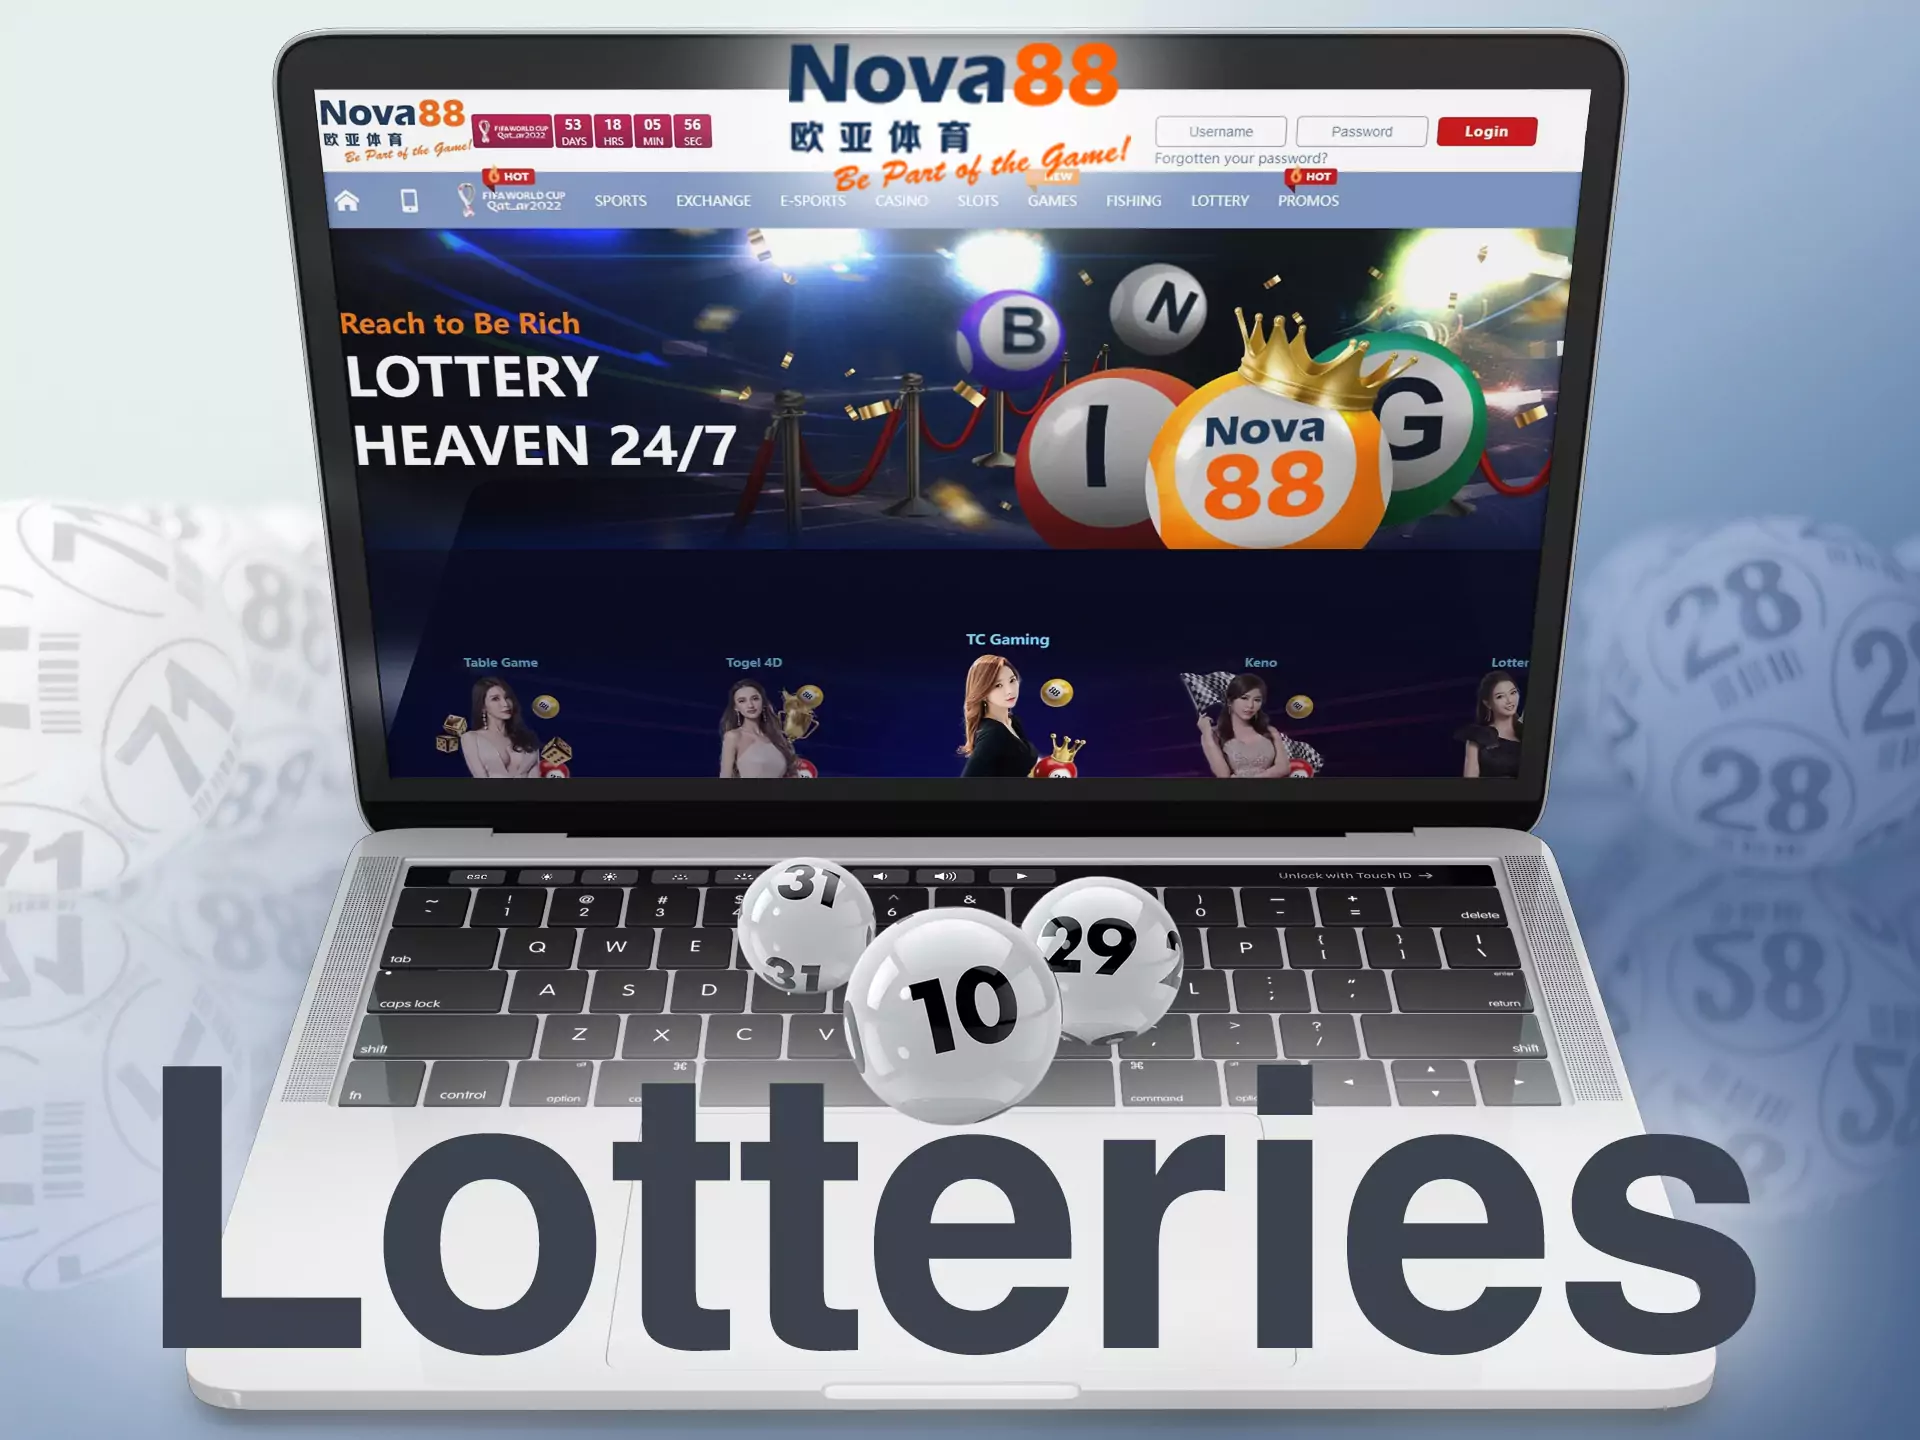 On the Nova88 website, you can buy lottery tickets and check results.